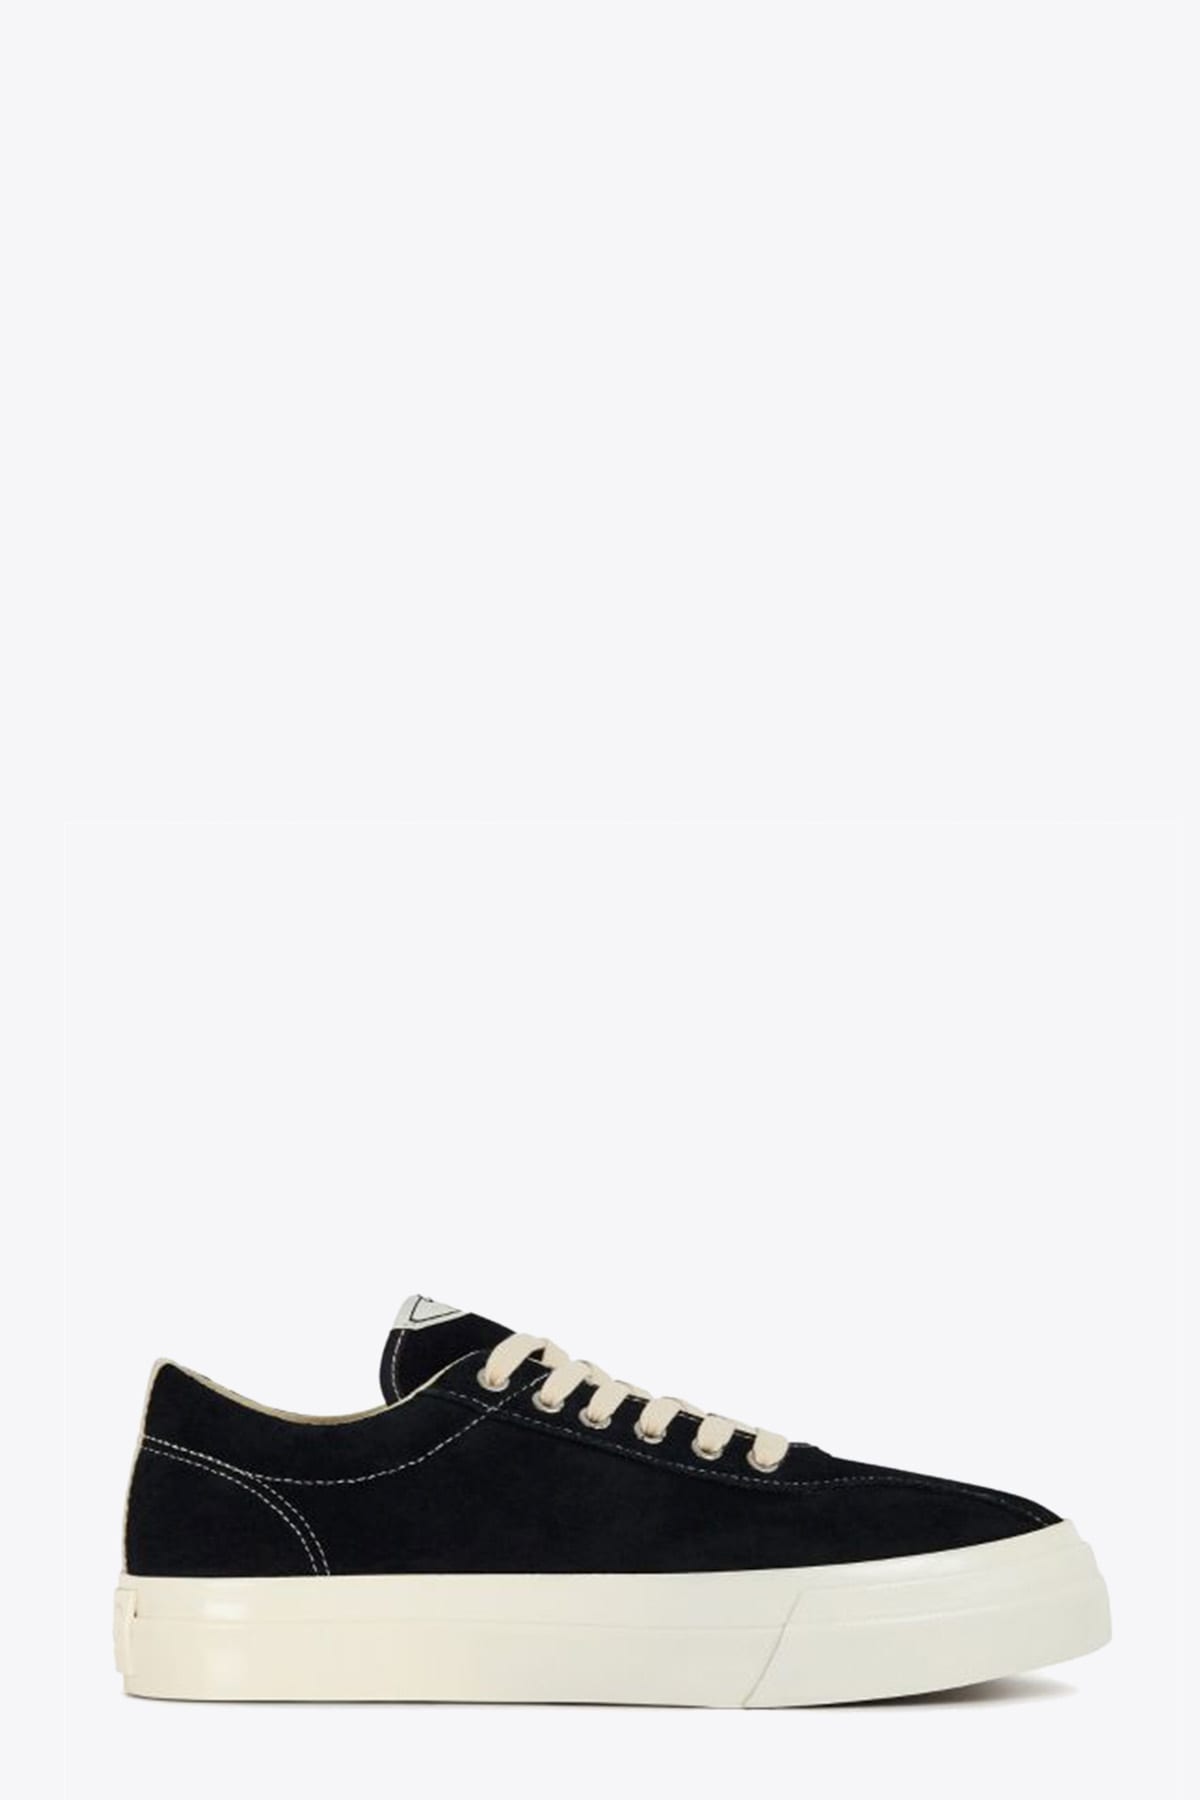 S.W.C Stepney Workers Club Dellow Suede Black suede low sneaker with contrasting stitchings - Dellow suede